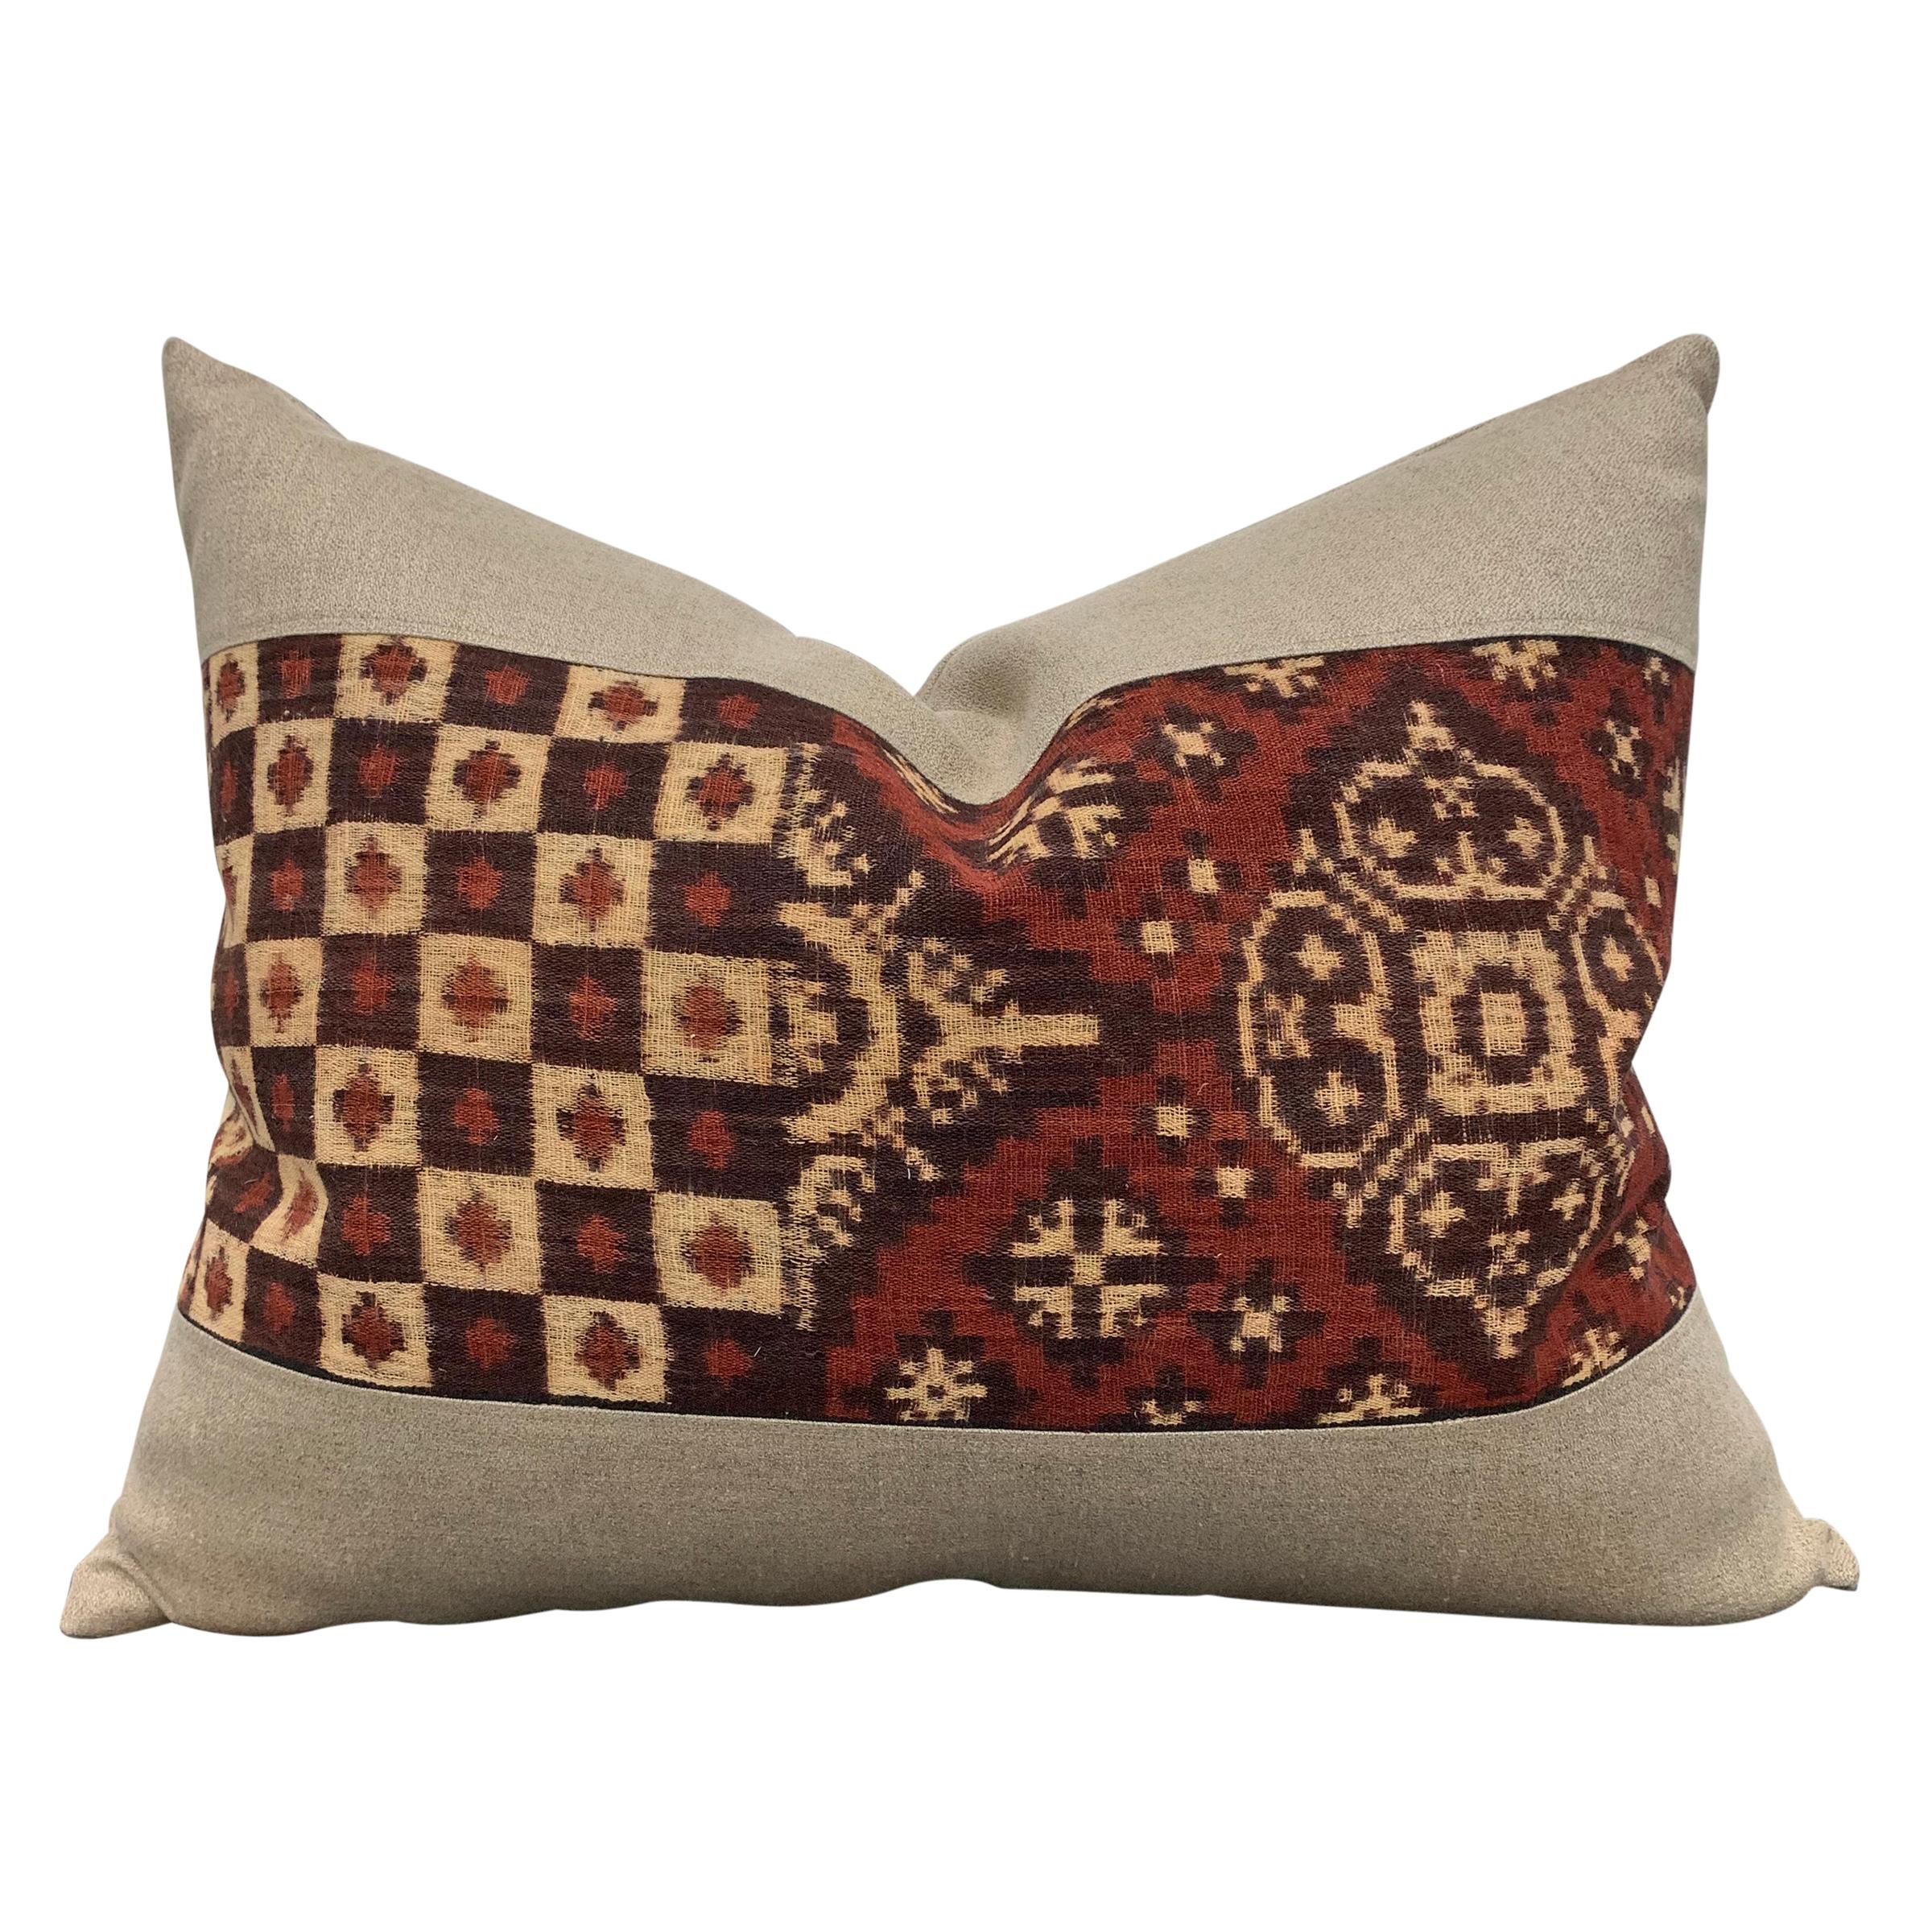 A wonderful pair of pillows made from an early 20th century Indonesian double-ikat panel, backed with linen and filled with down.